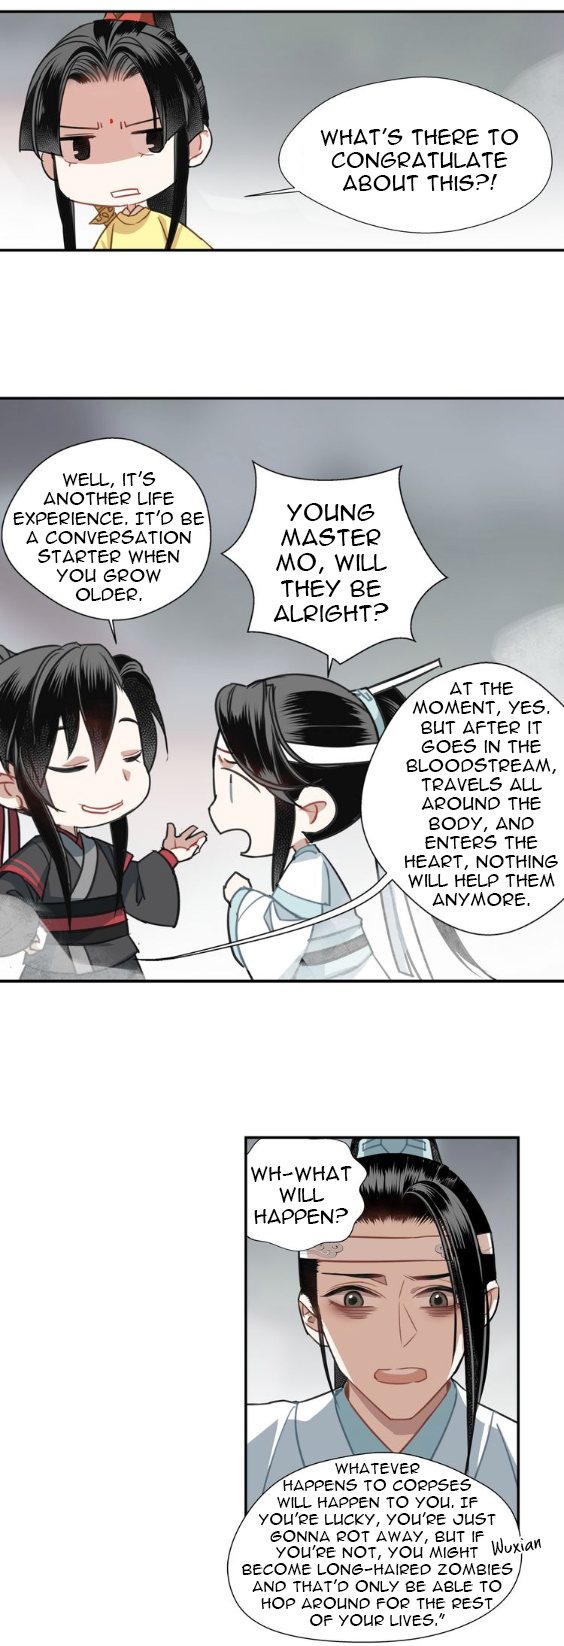 The Grandmaster of Demonic Cultivation Ch. 71